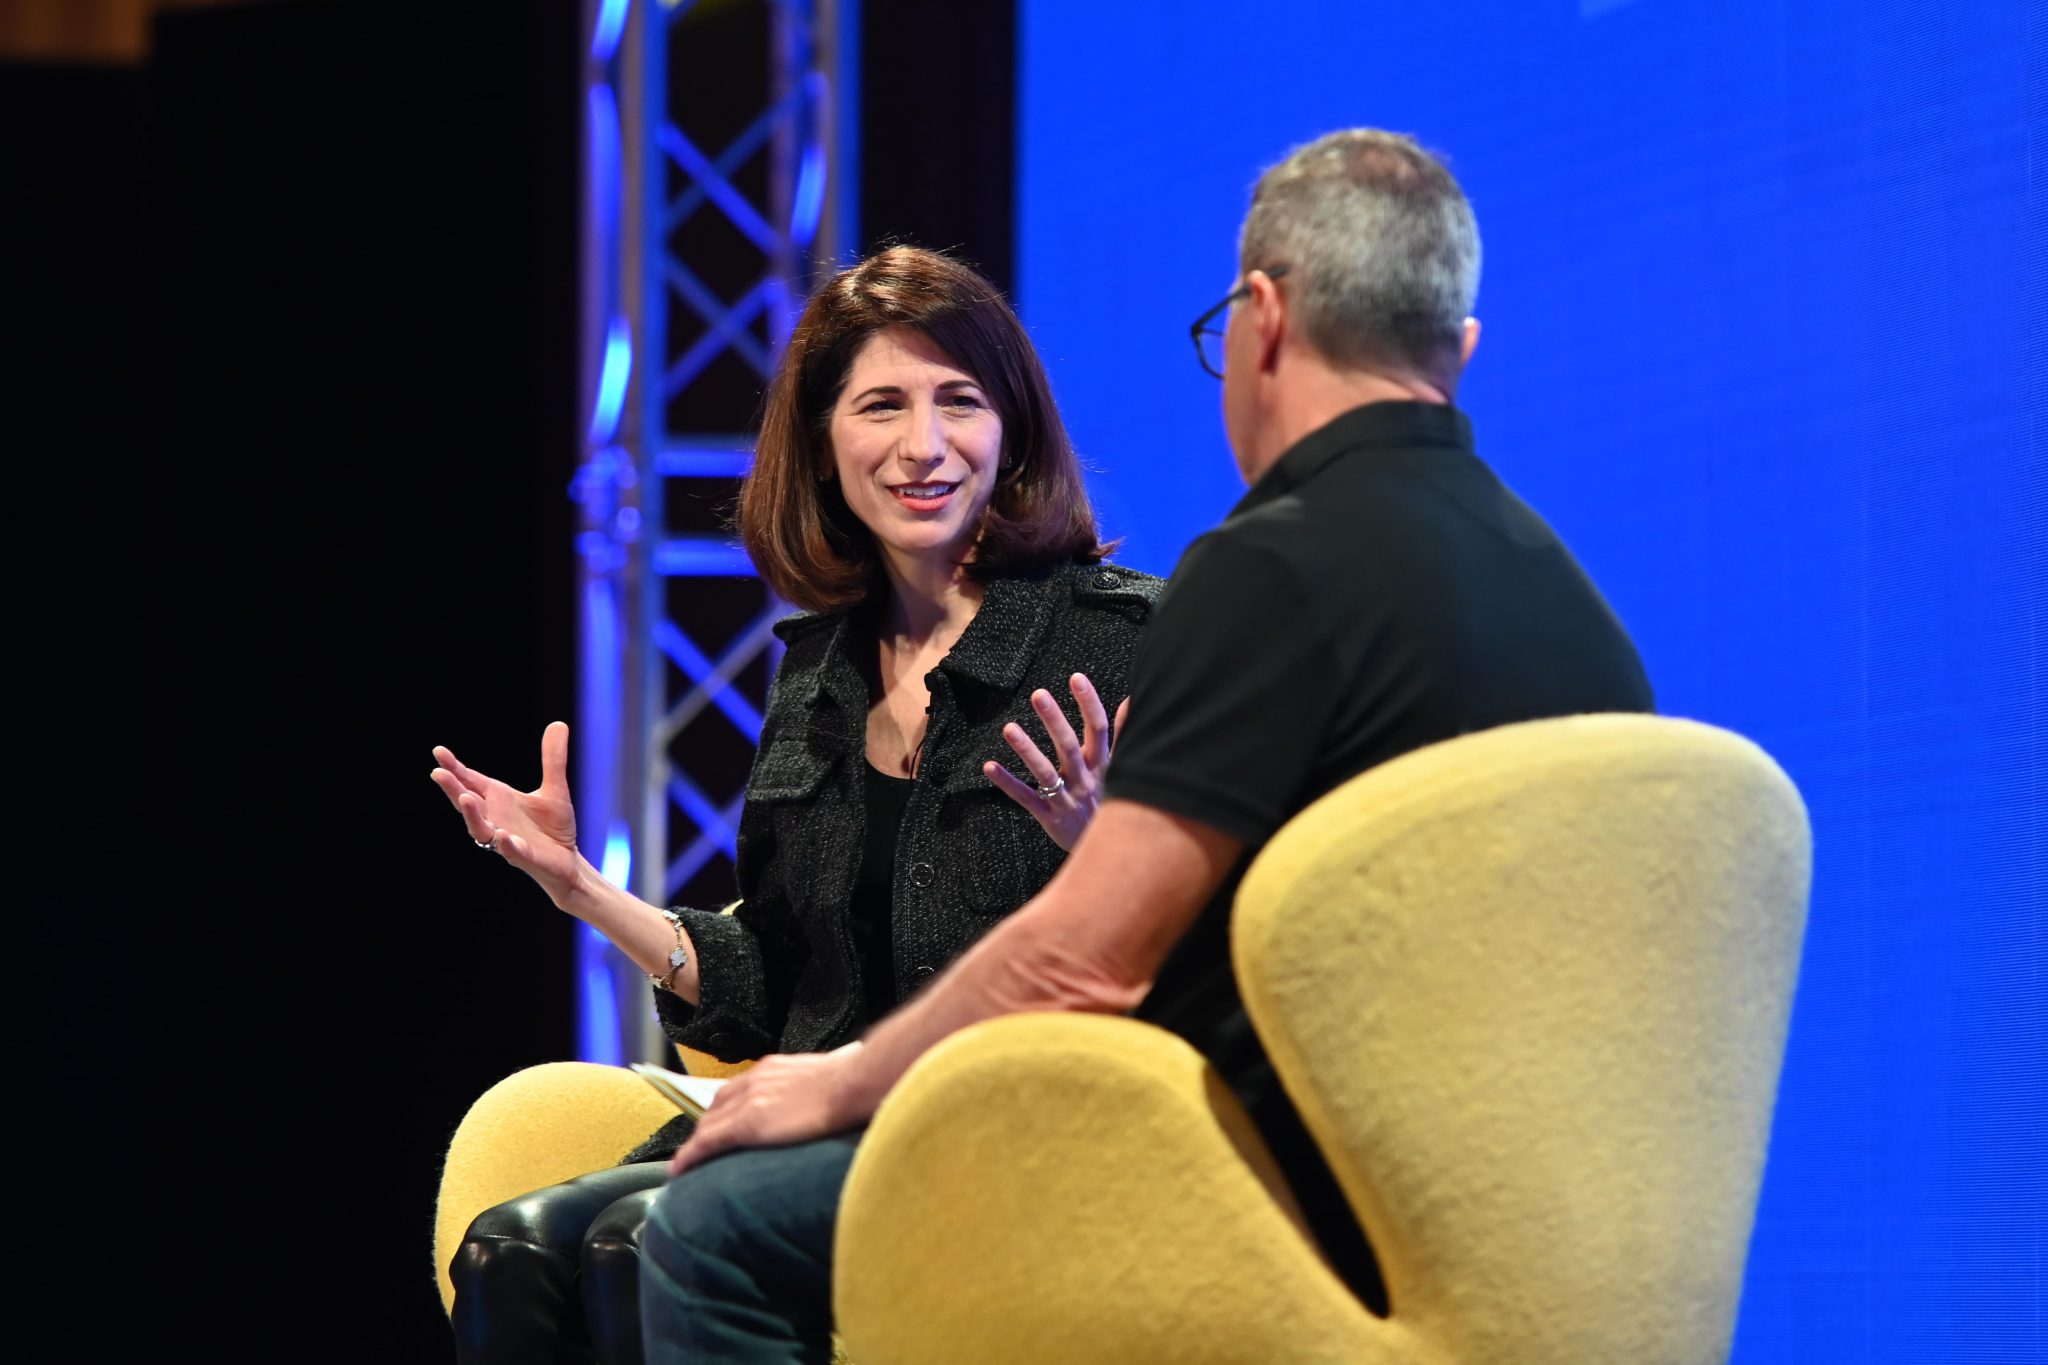 Ariane Gorin of Expedia for Travel in conversation with Skift’s Dennis Schaal at Skift Forum Europe on March 24, 2022 in London. Source: Skift